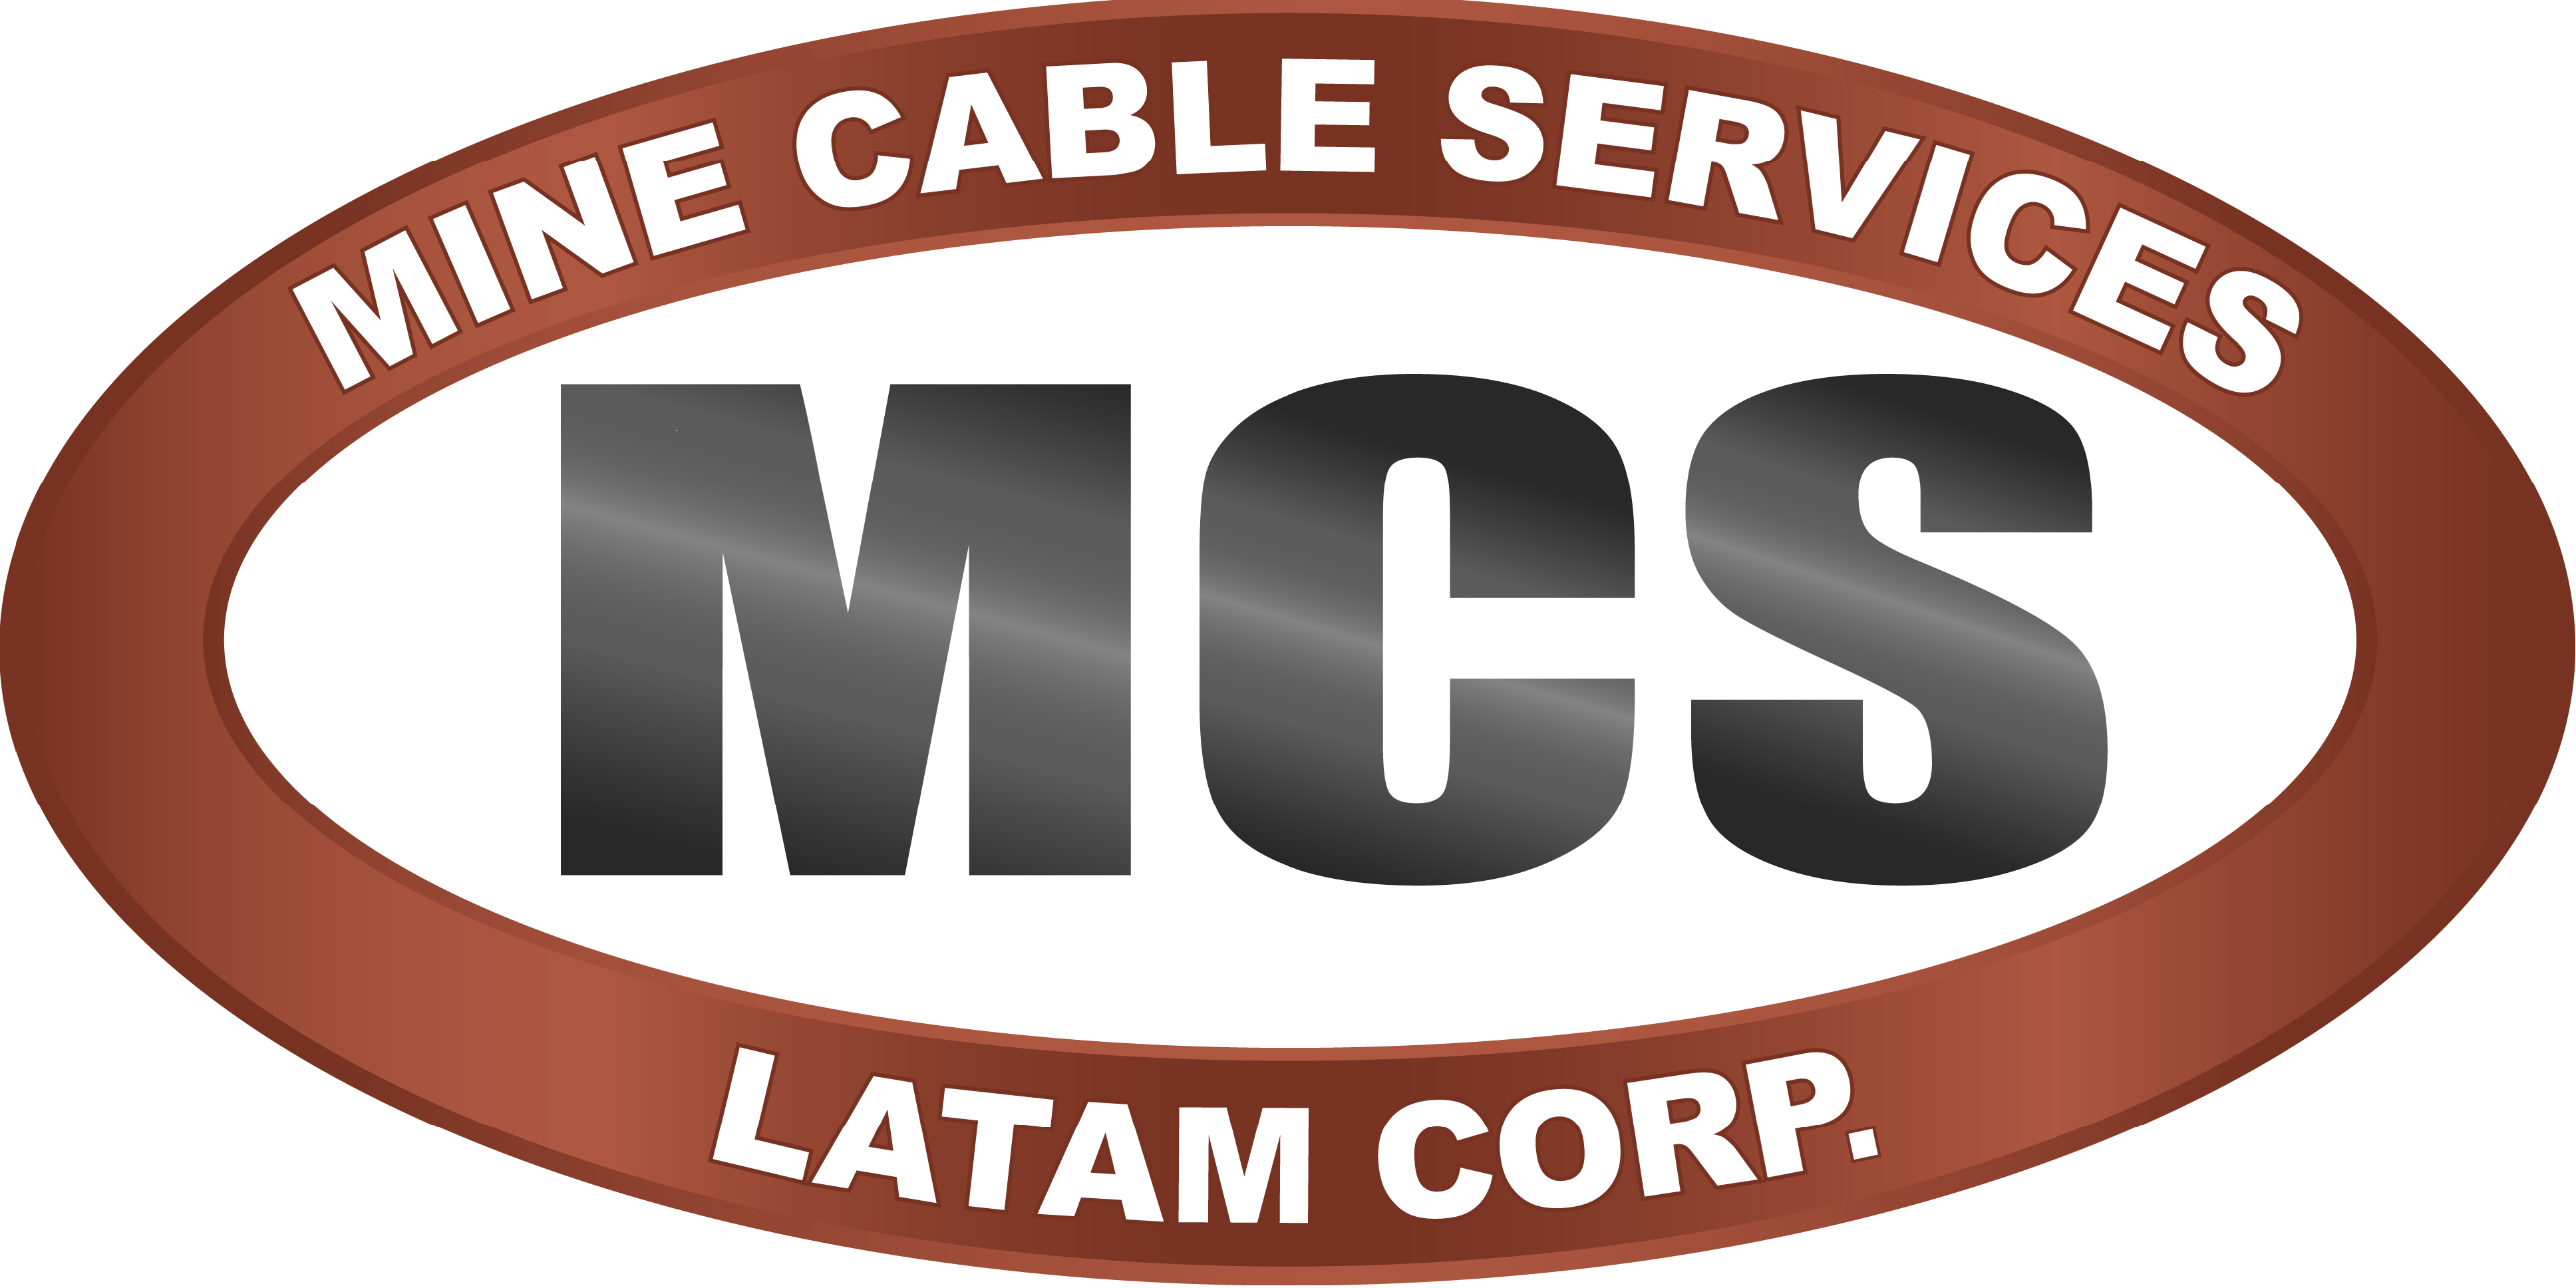 Mine Cable Services Latam Corp